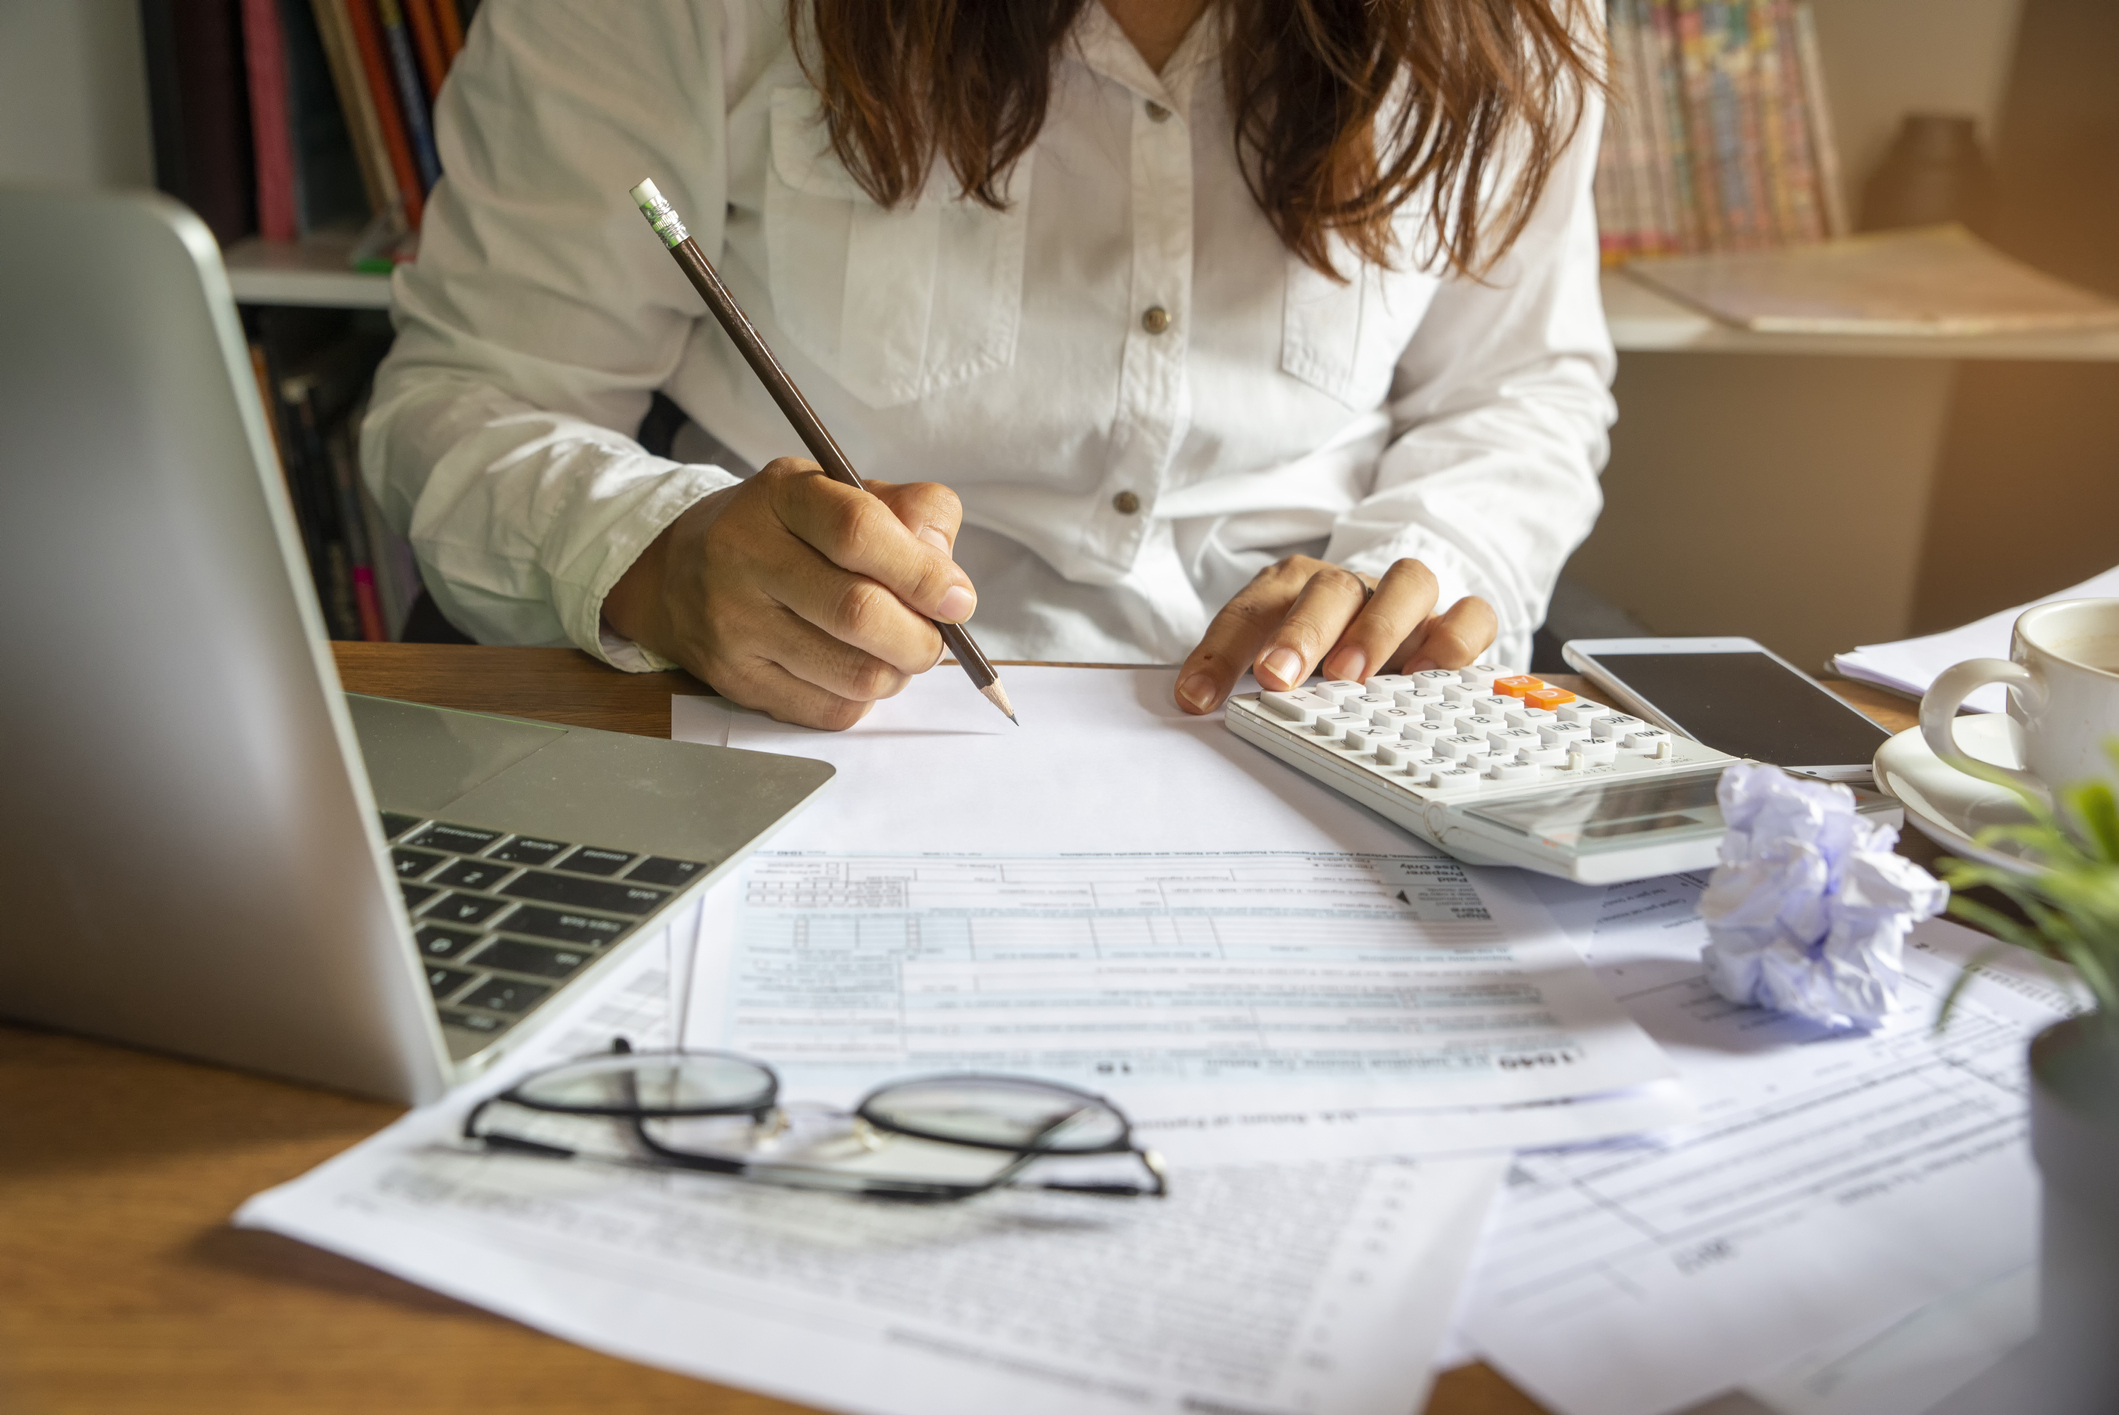 A legal professional peruses paperwork and uses a calculator as she works on her law firm business strategy.